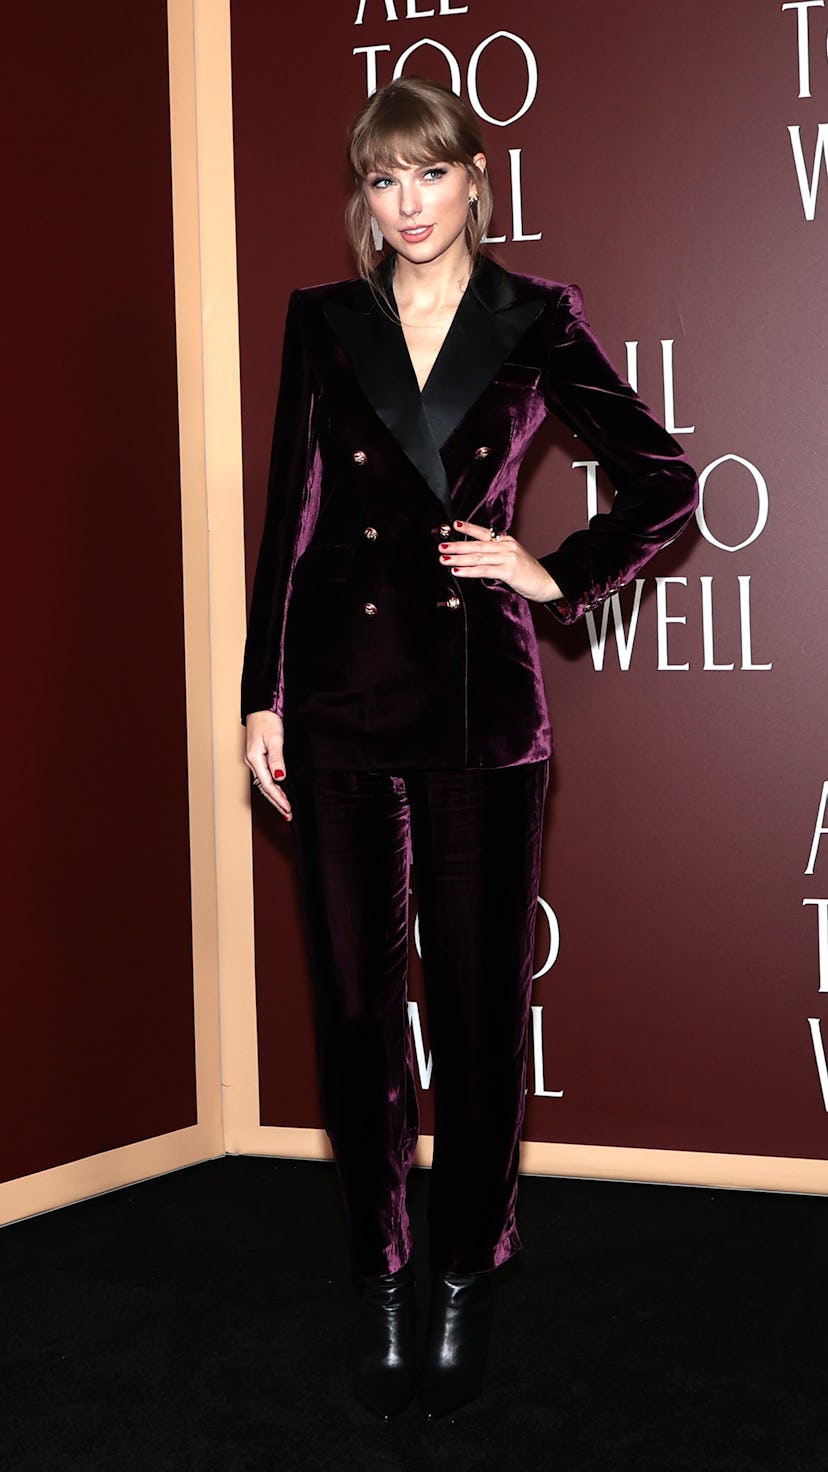 Taylor Swift wears a velvet suit to the "All Too Well" New York Premiere on November 12, 2021, in on...